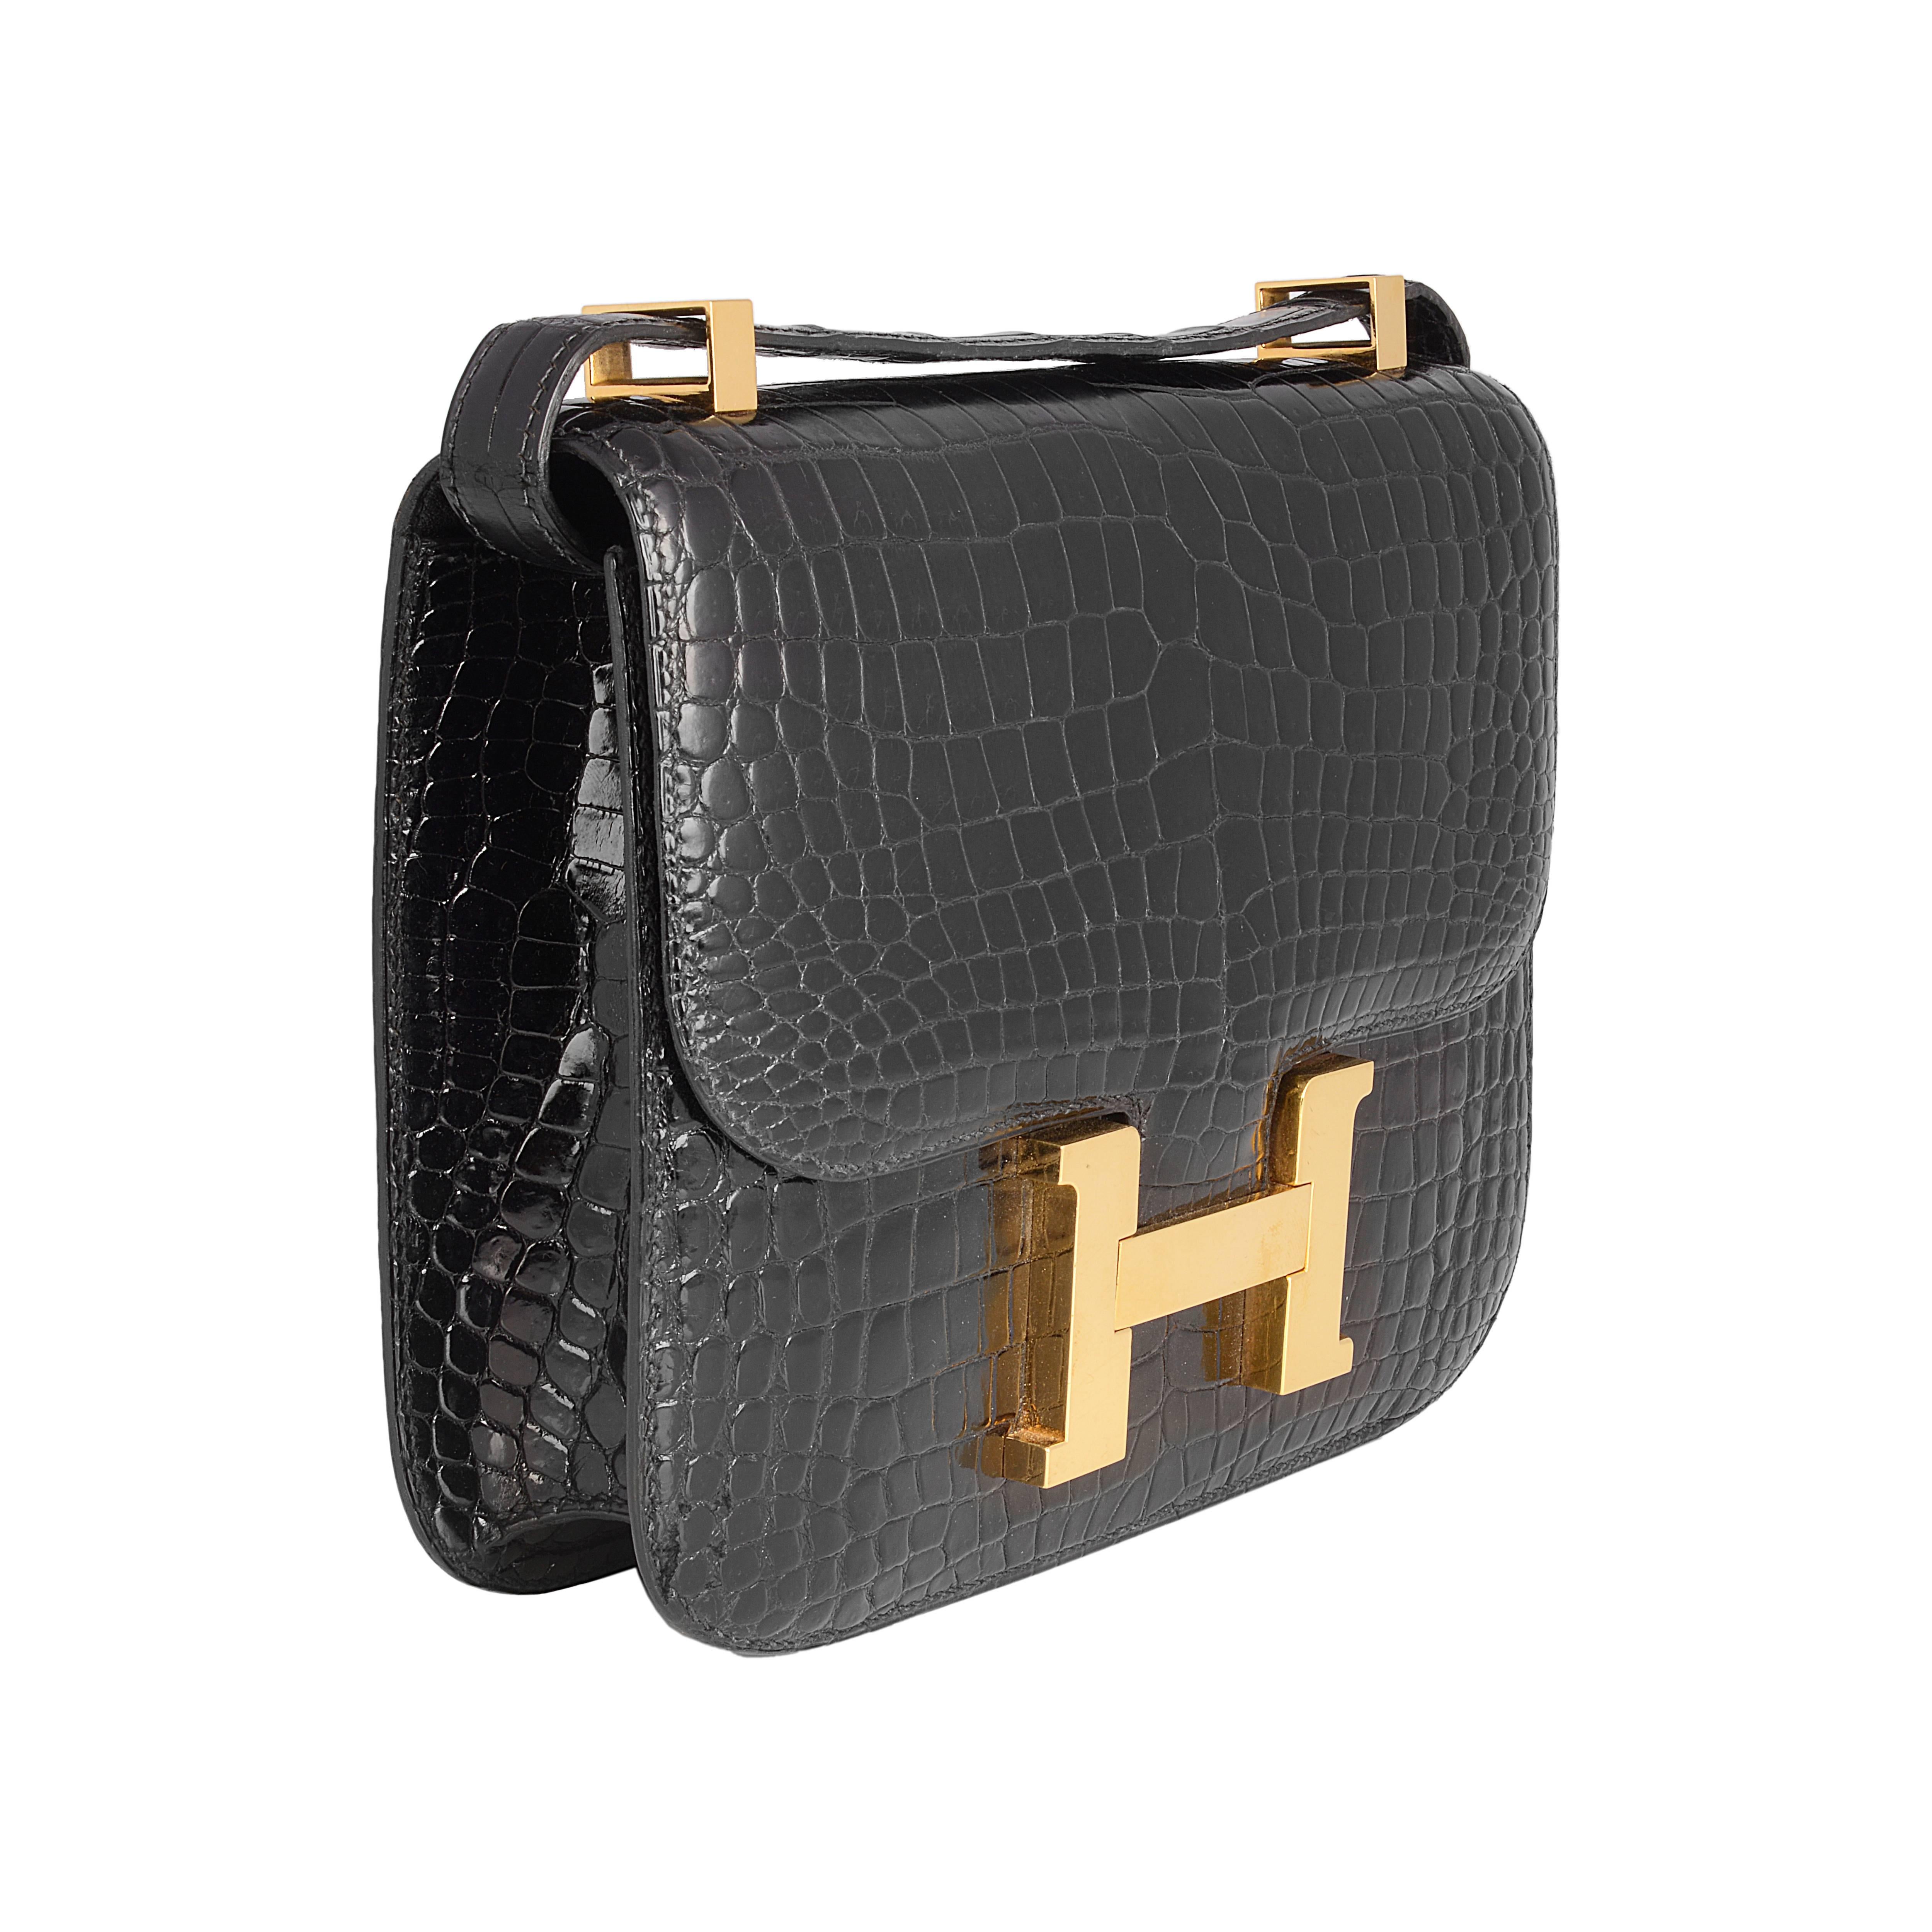 Crafted in the extremely rare crocodile skin, Porosus, this vintage edition of the Hermès Constance comes in an elegant black colour. The interior features two pockets, one zipped. Combined with the gold-tone large H hardware, this bag is a must